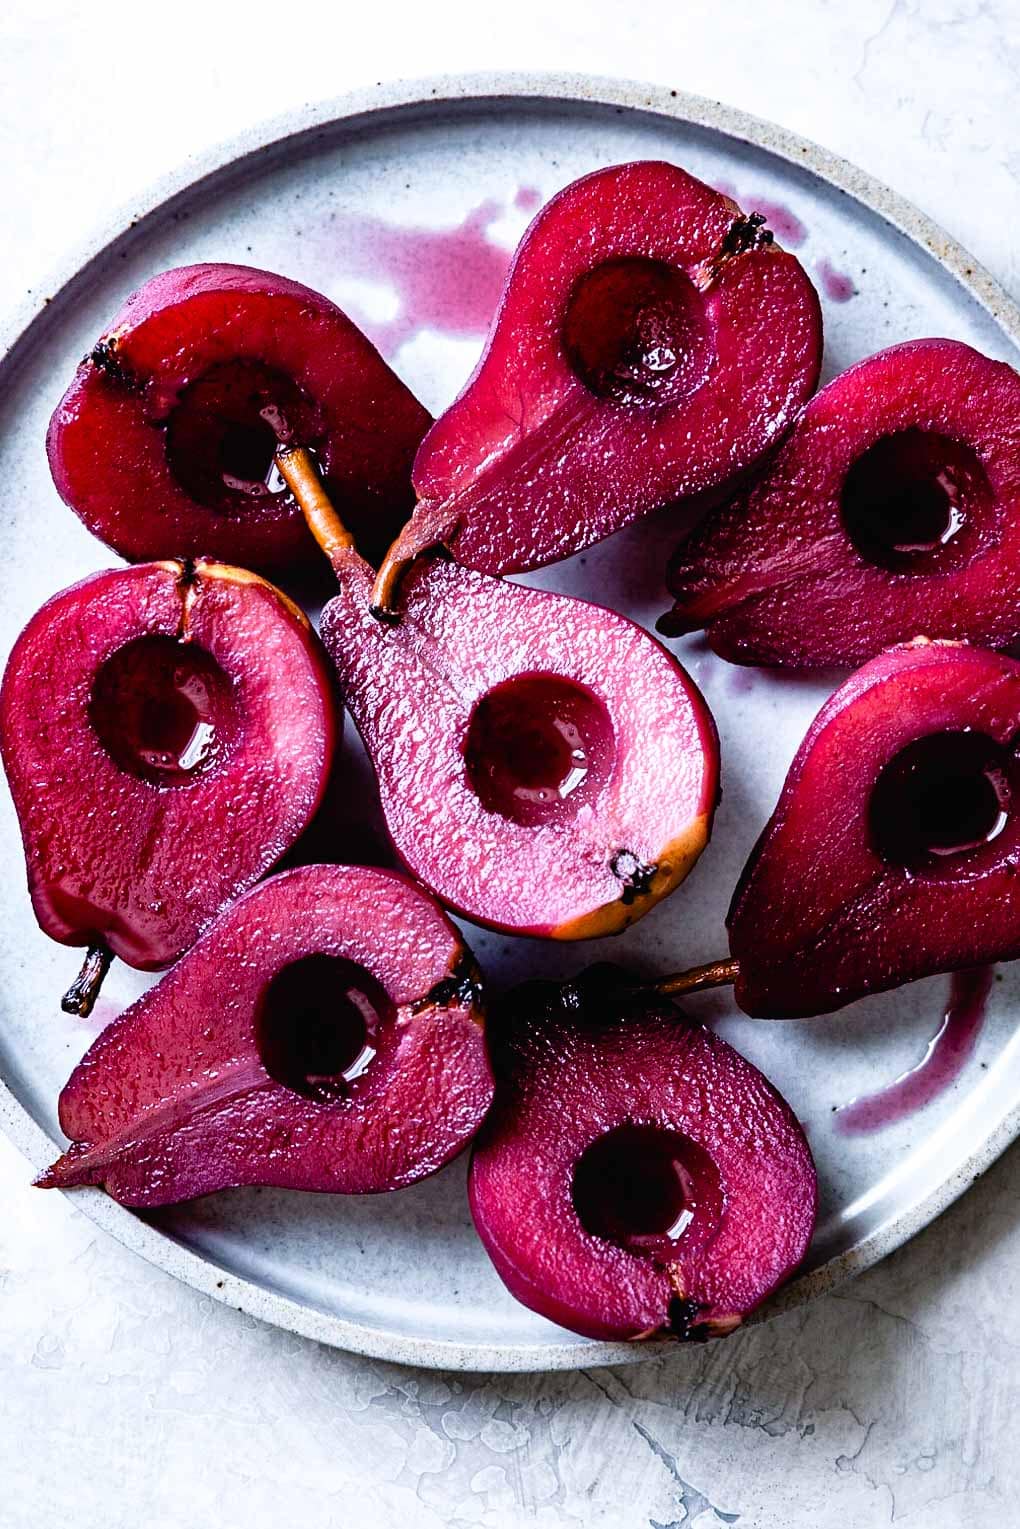 crimson poached pear halves in red wine are arranged on a blue plate